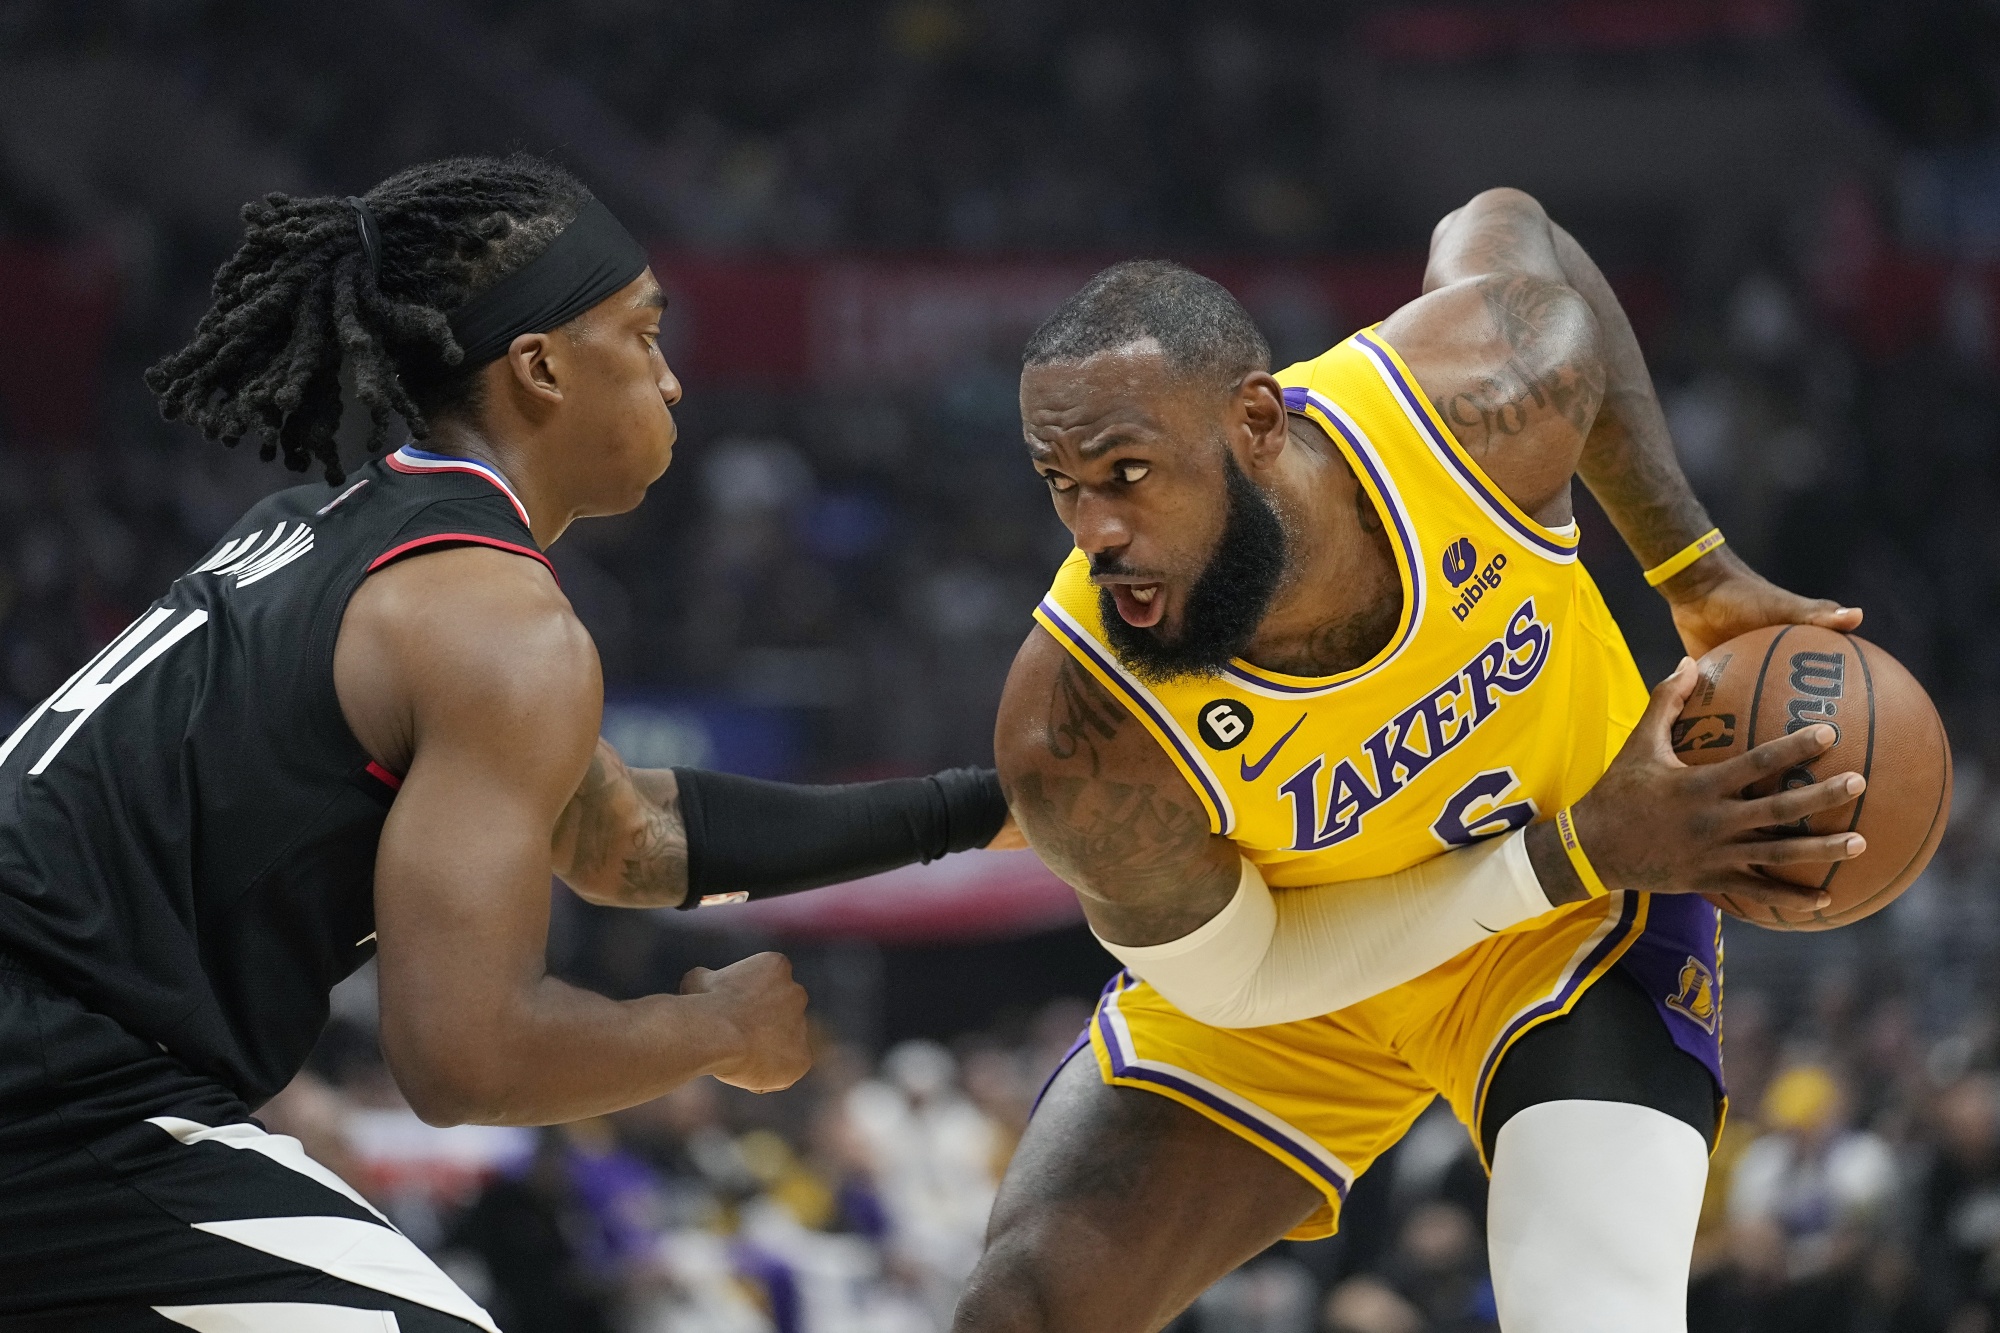 Lakers ticket prices soar as LeBron James approaches NBA scoring record